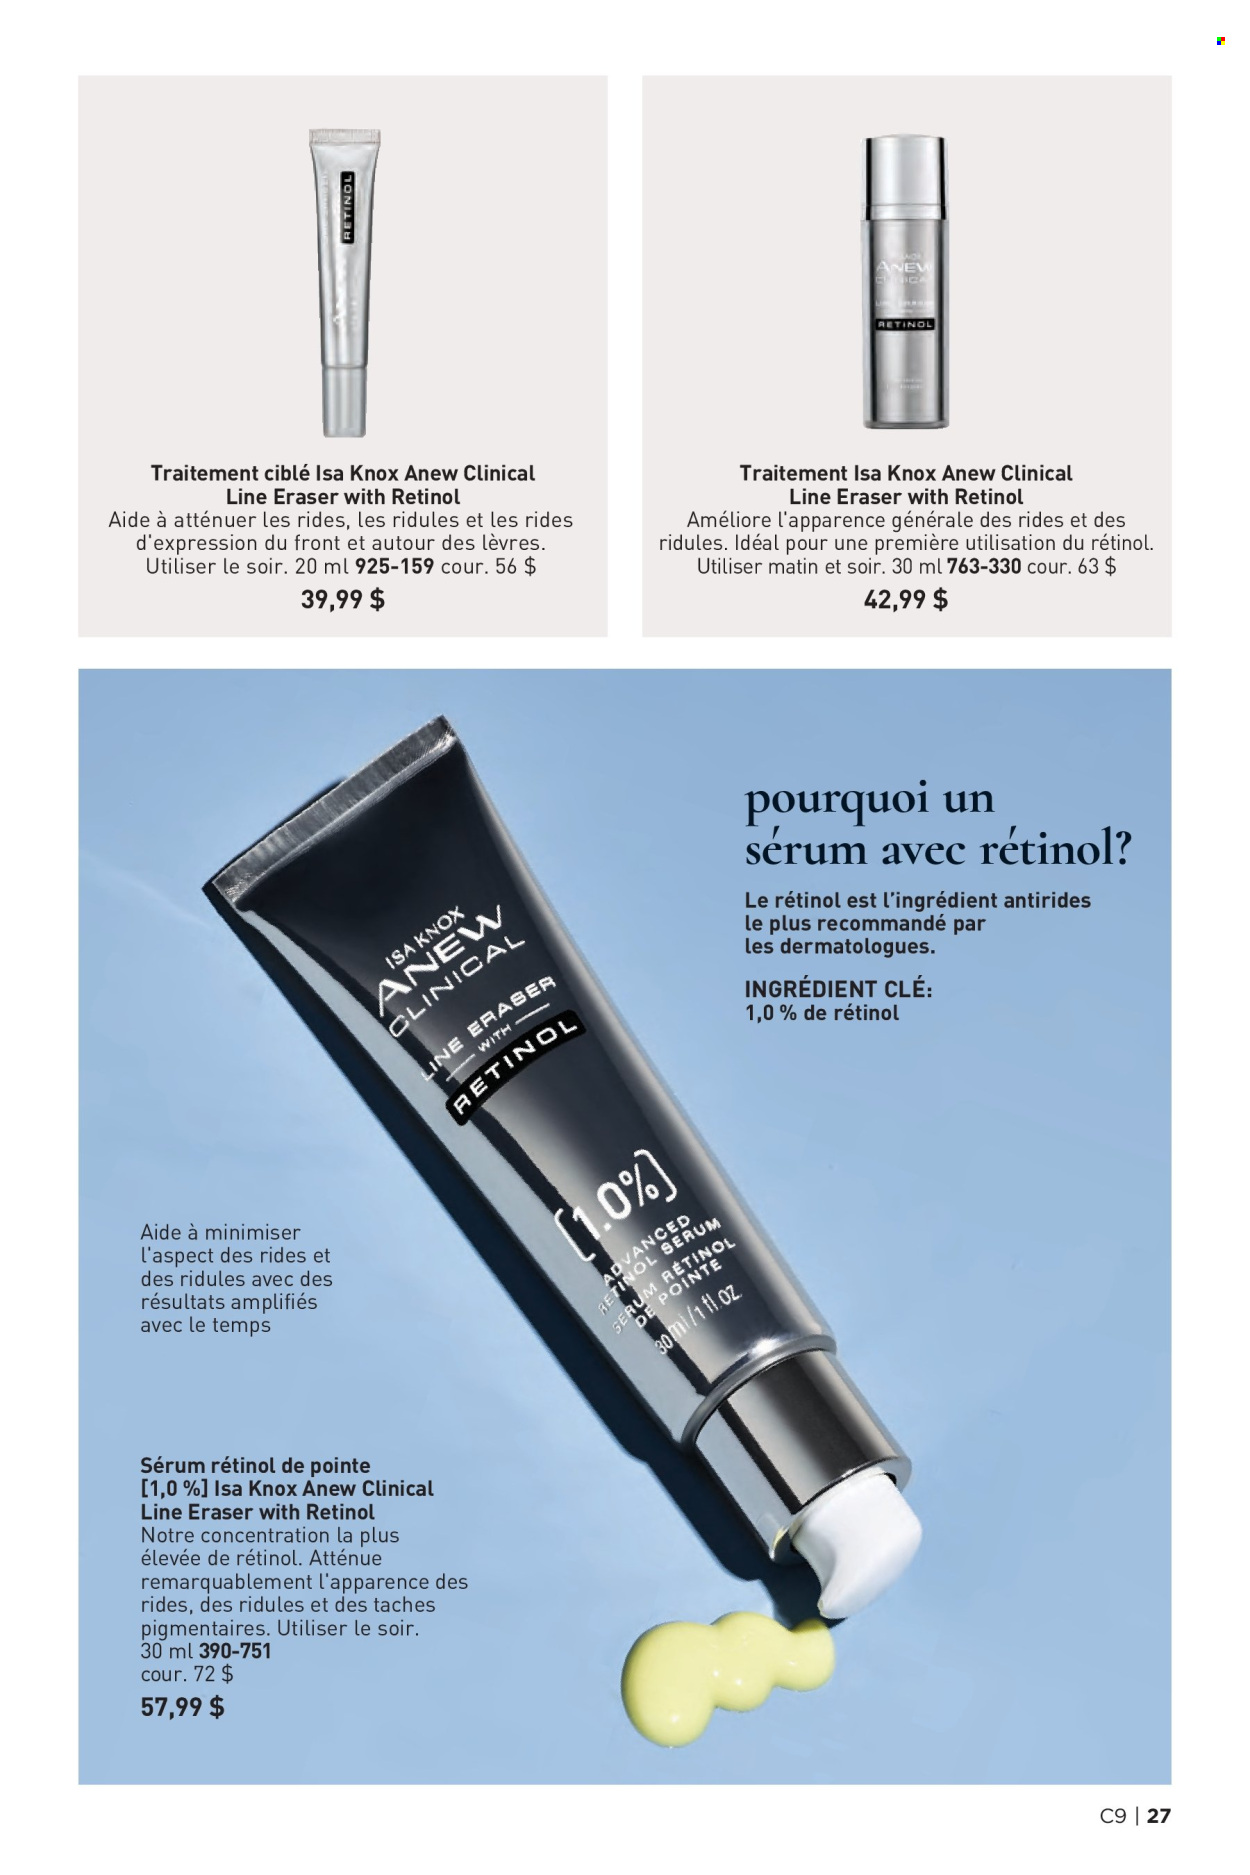 thumbnail - Avon Flyer - Sales products - Anew, serum, Line Eraser. Page 27.